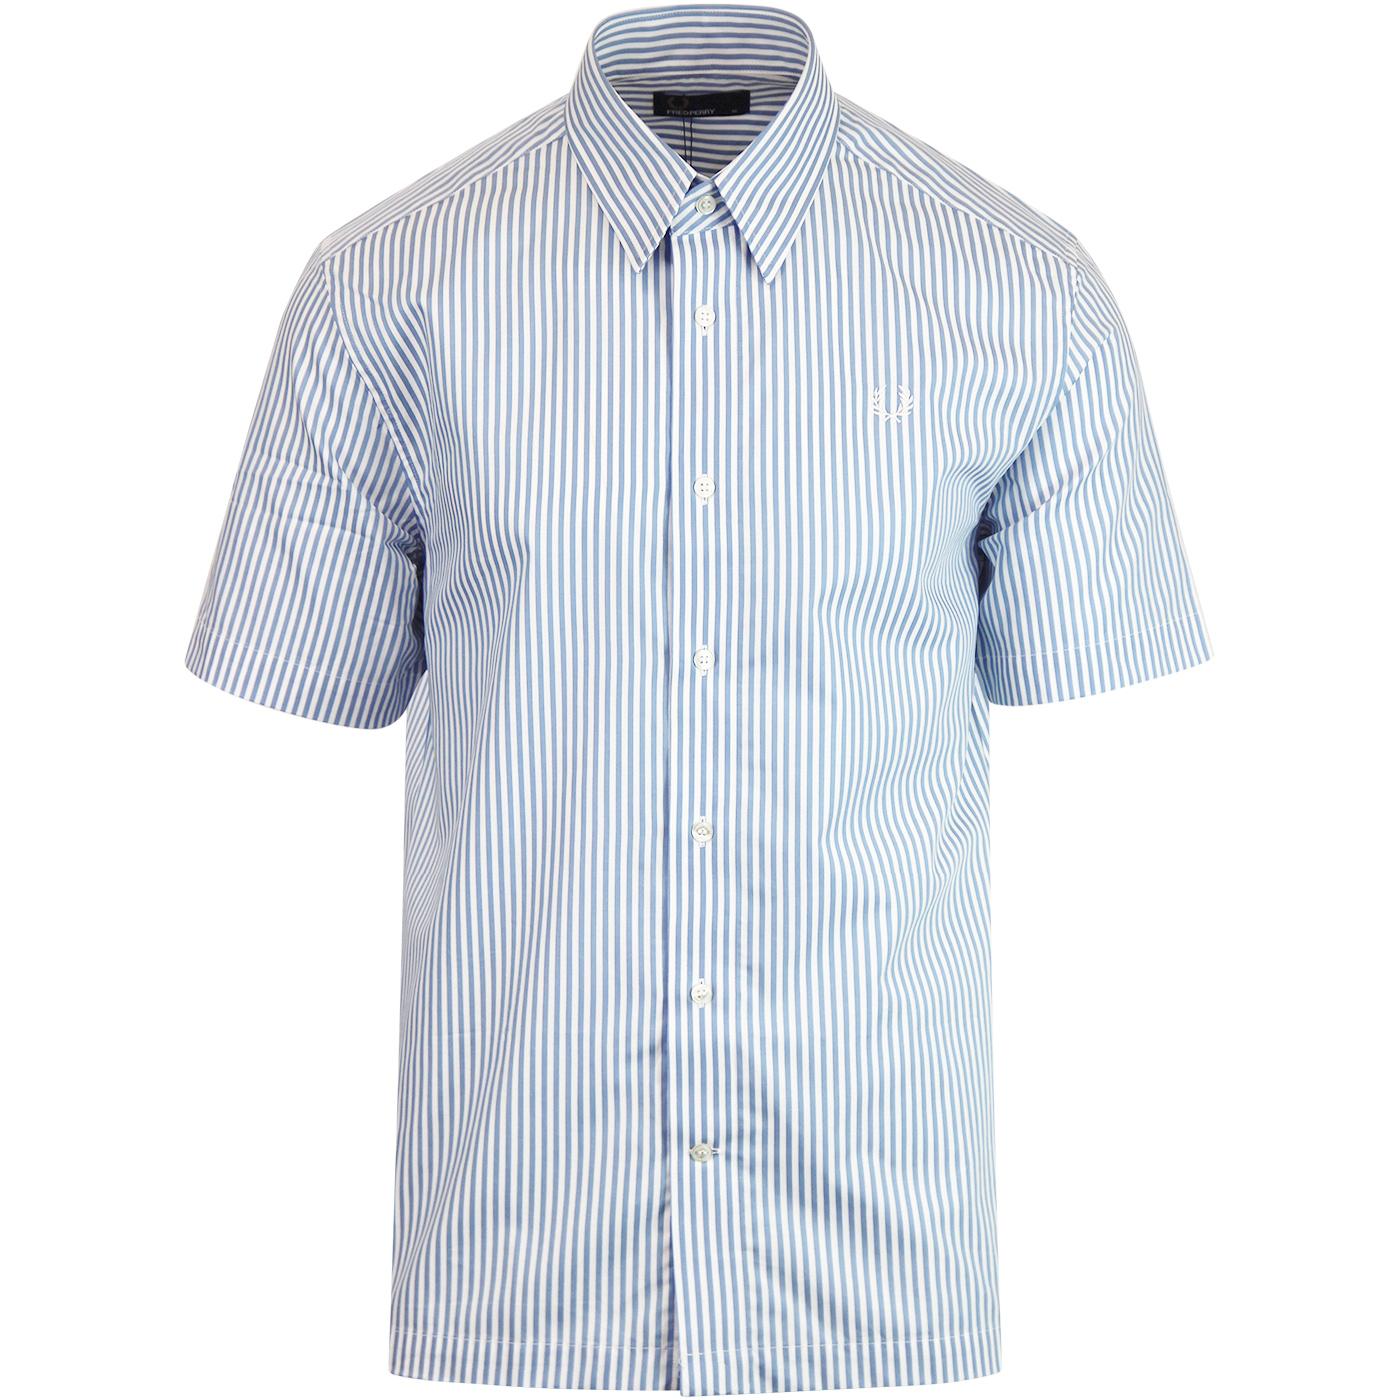 FRED PERRY S/S Vertical Stripe 60s Mod Shirt (Sky)